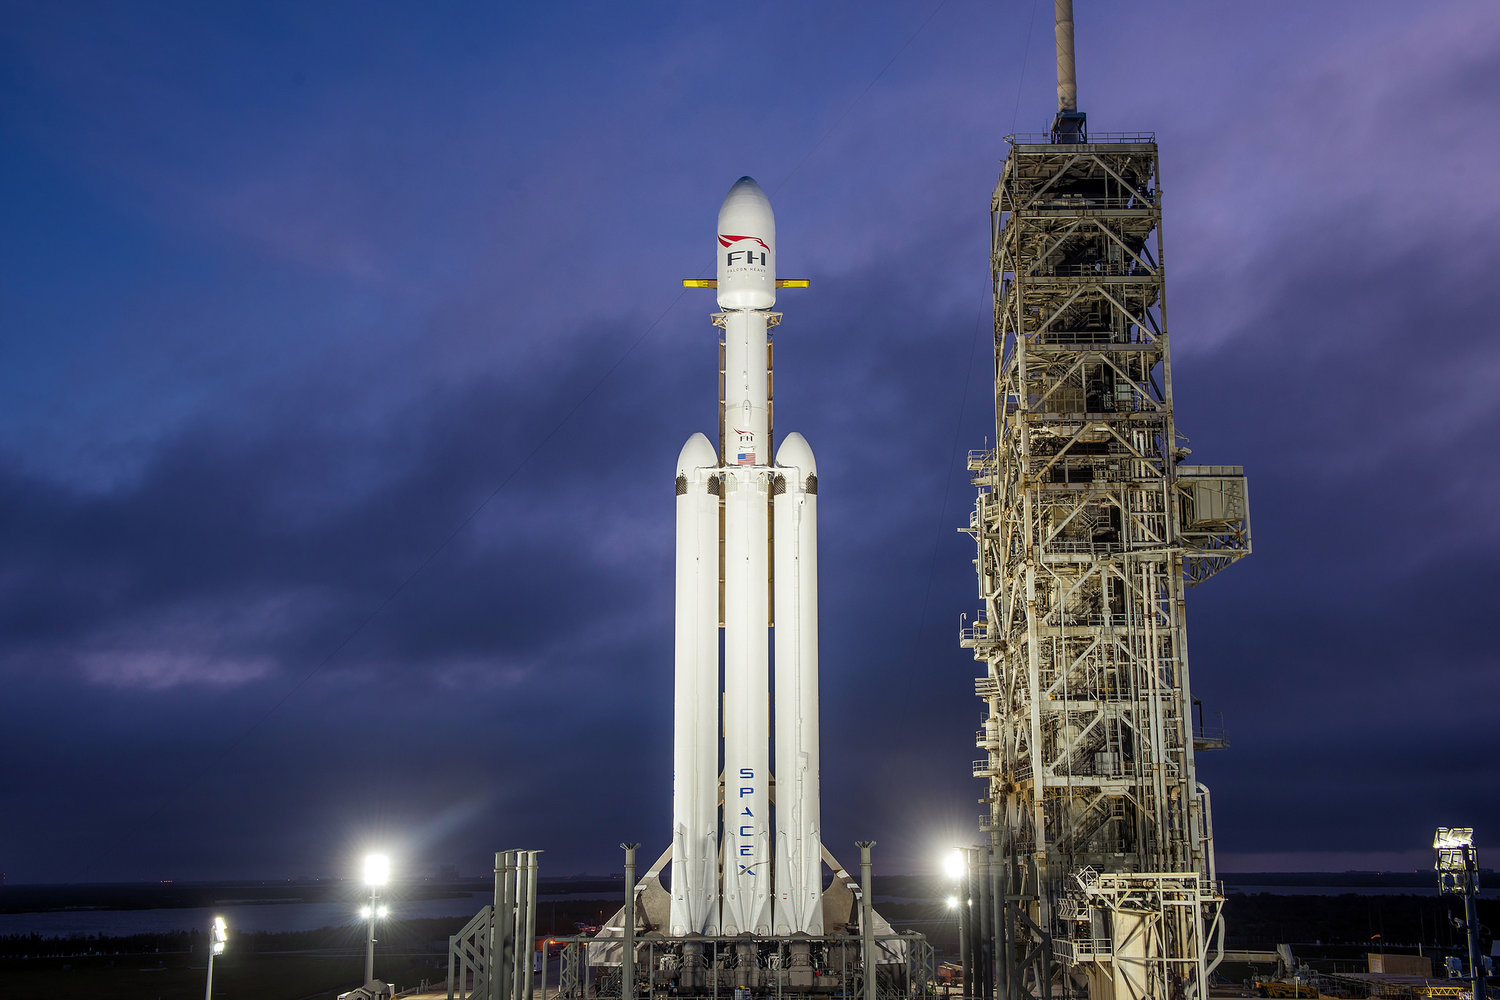 Spacexs First Falcon Heavy Rocket To Be Launched On February 6